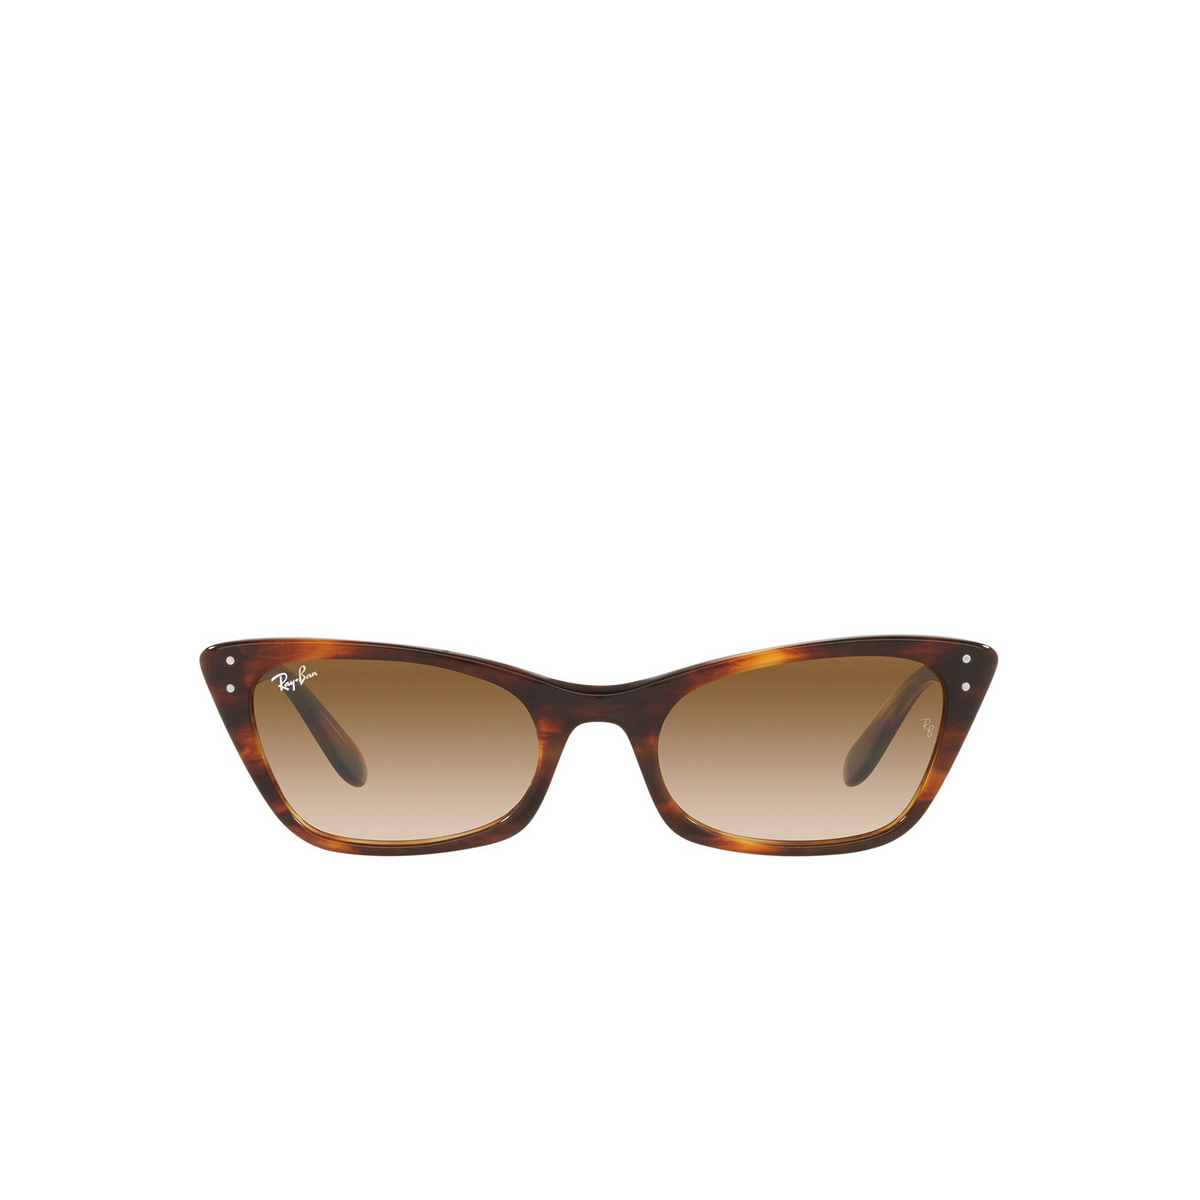 Ray-Ban® Cat-eye Sunglasses: Lady Burbank RB2299 color Striped Havana 954/51 - front view.